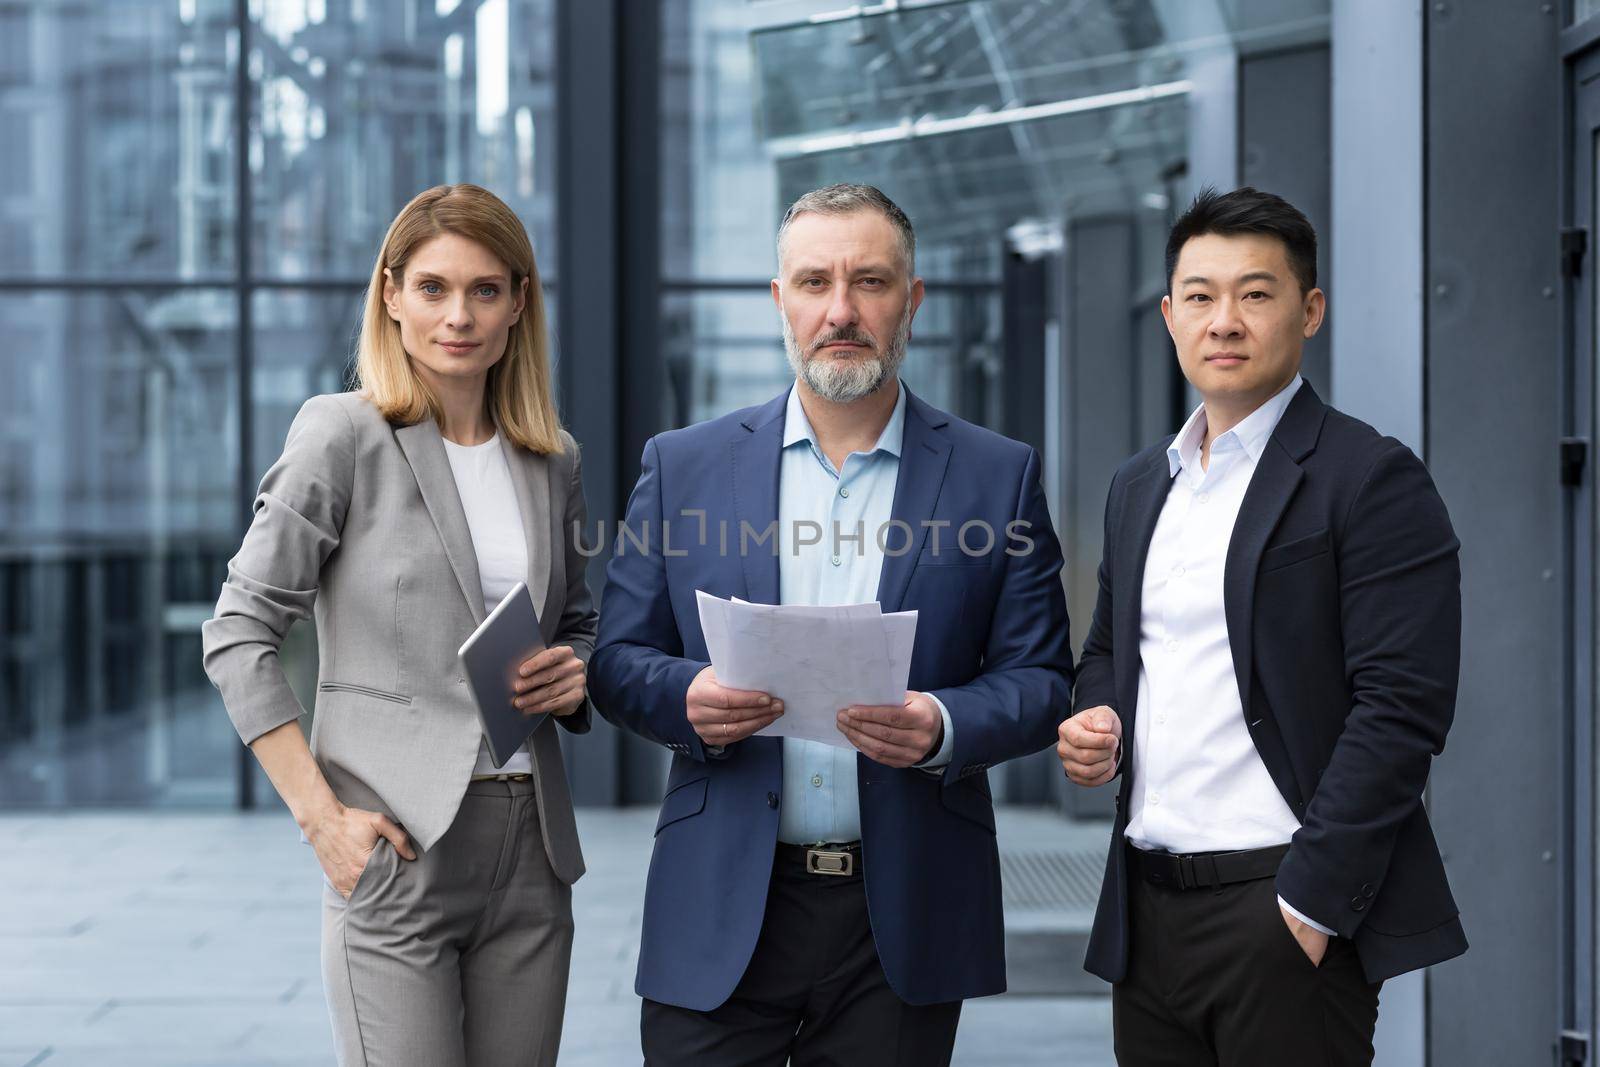 A team of experienced team leaders and specialists, a diverse group of business people, three people in business clothes are serious and focused in business clothes looking at the camera